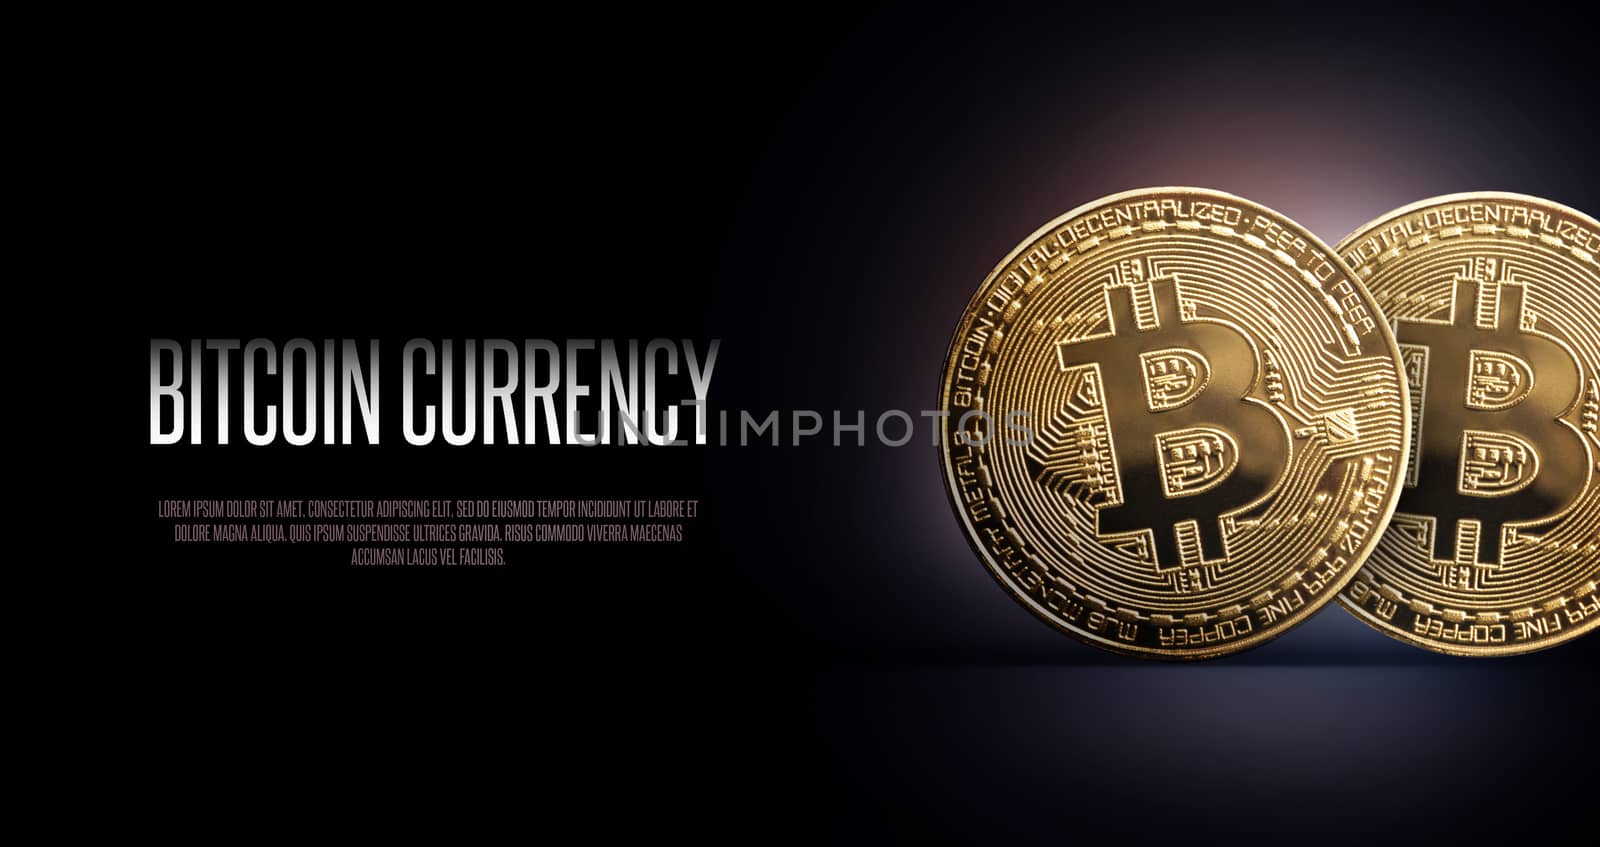 Bitcoin Banner Header. Two gold coin - Cryptocurrency with space for your own text. Concept